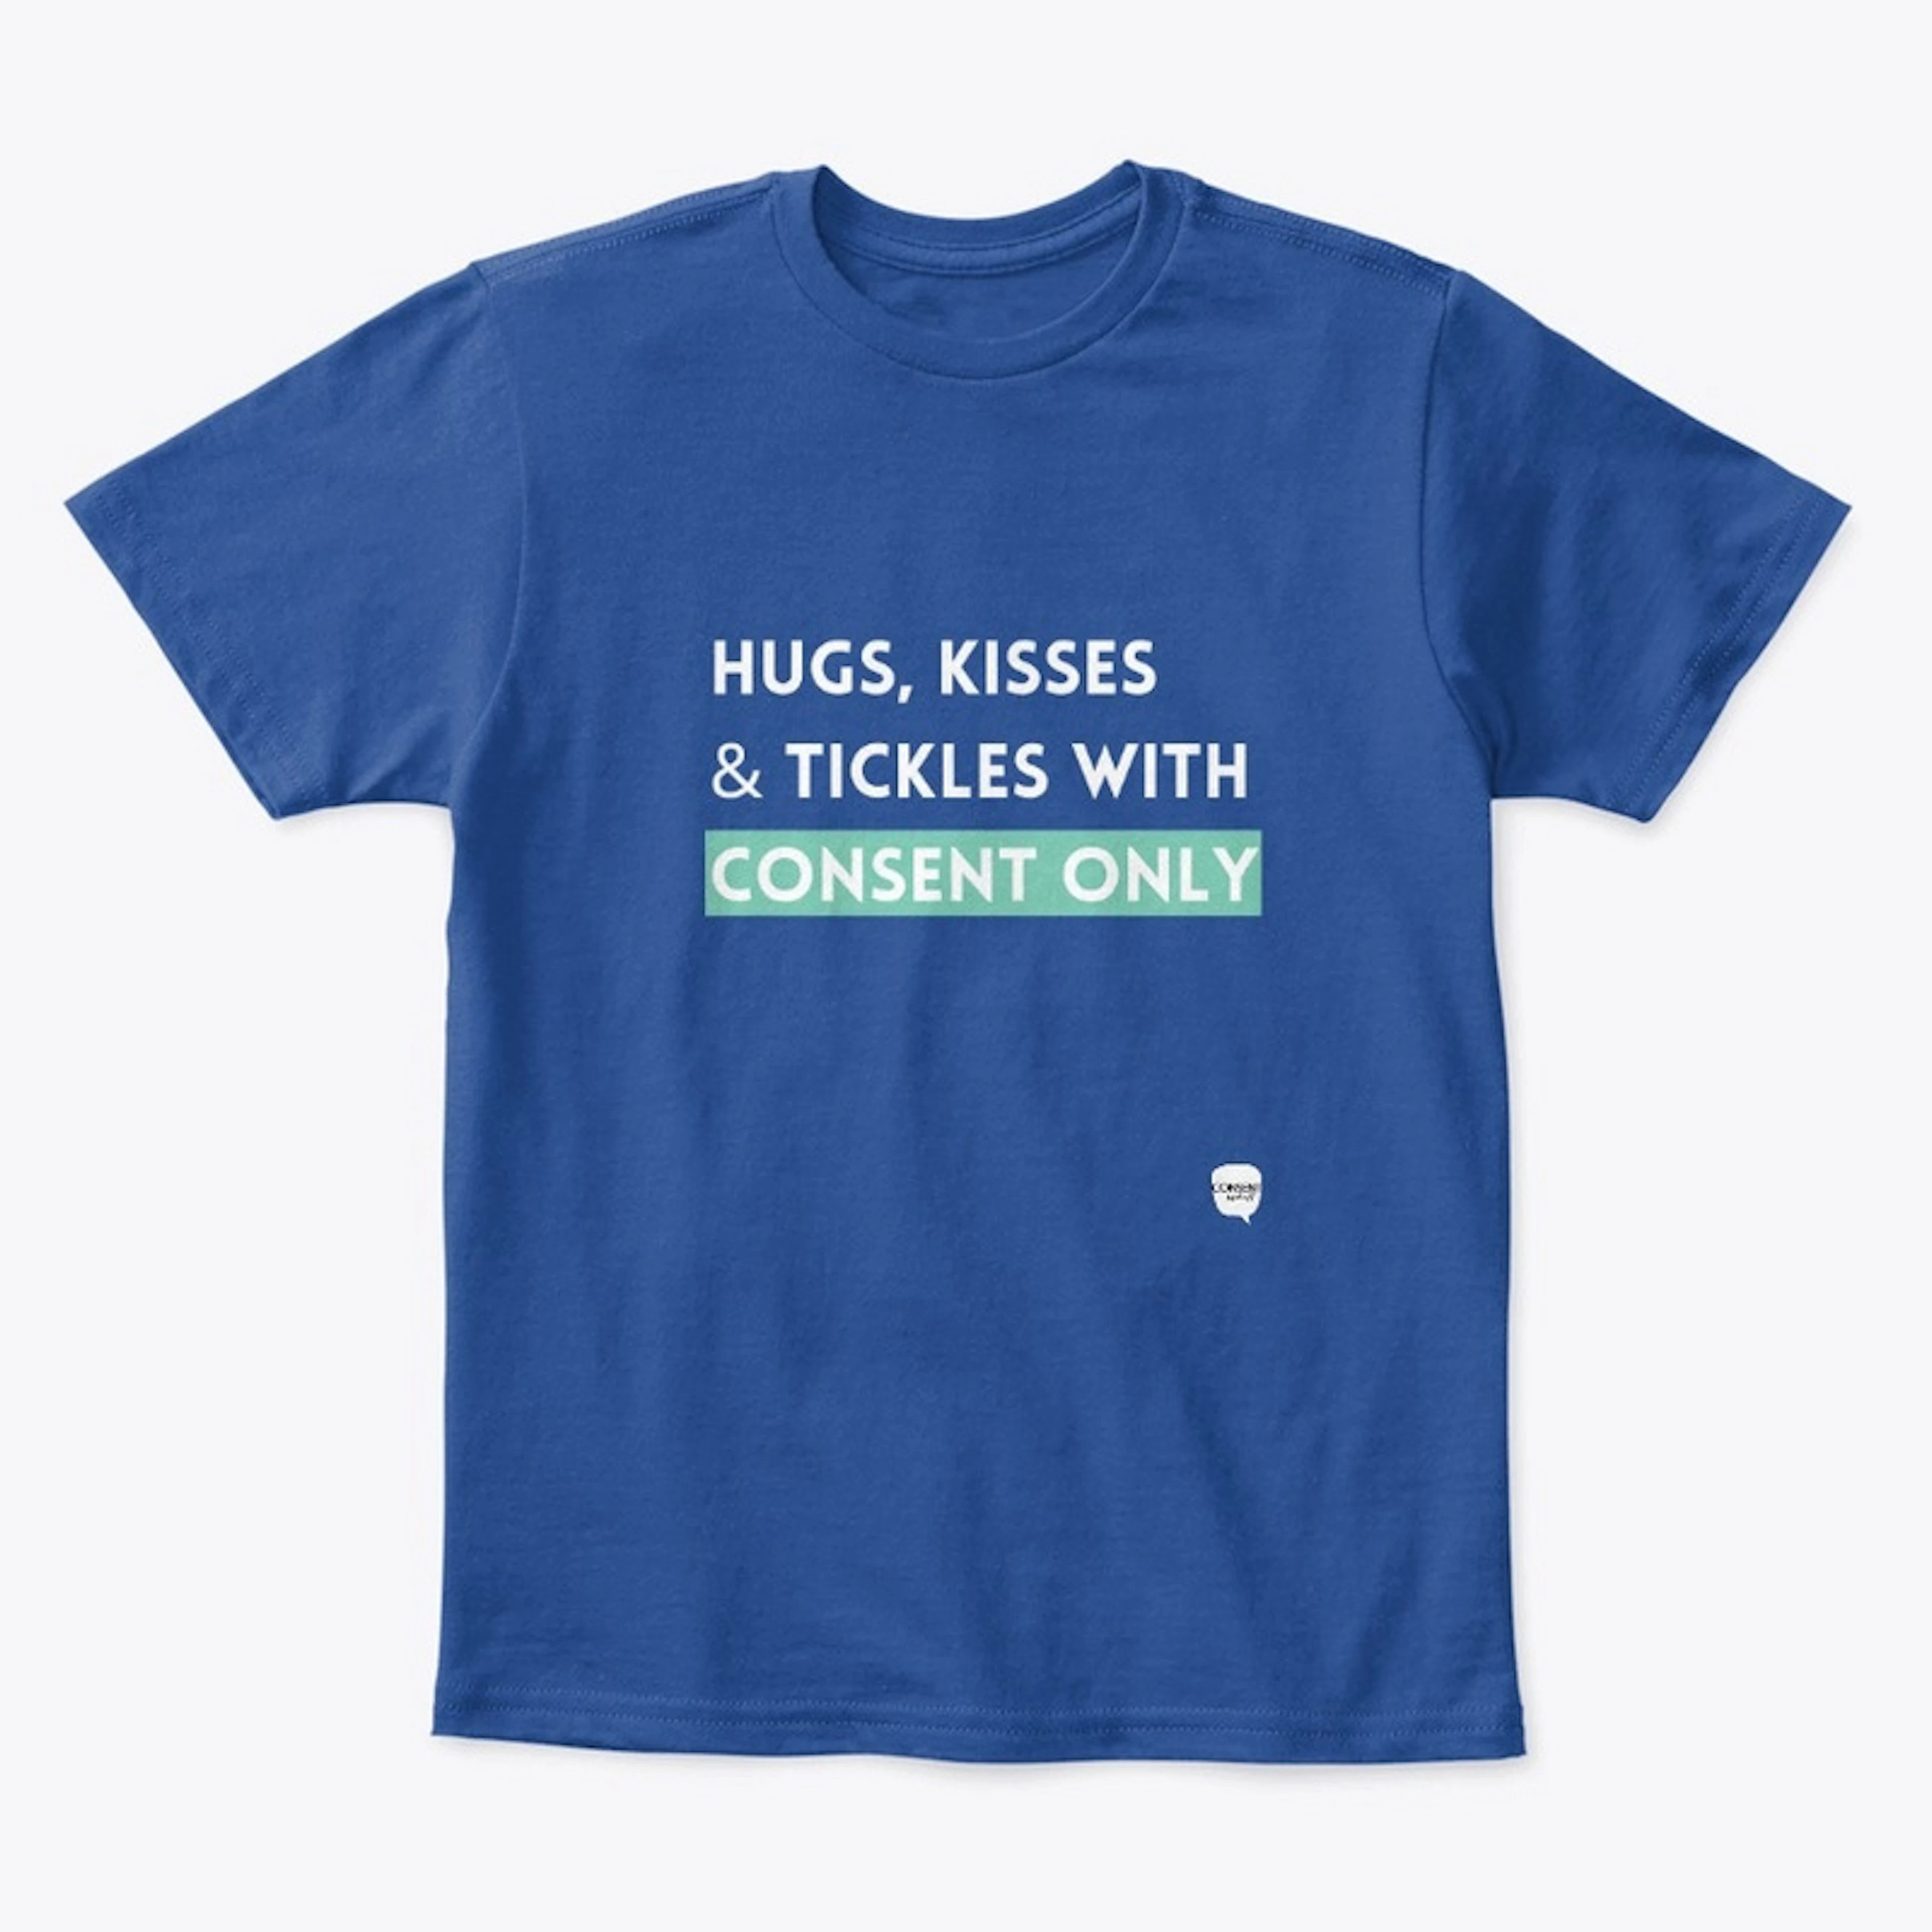 HUGS, KISSES + TICKLES WITH CONSENT ONLY